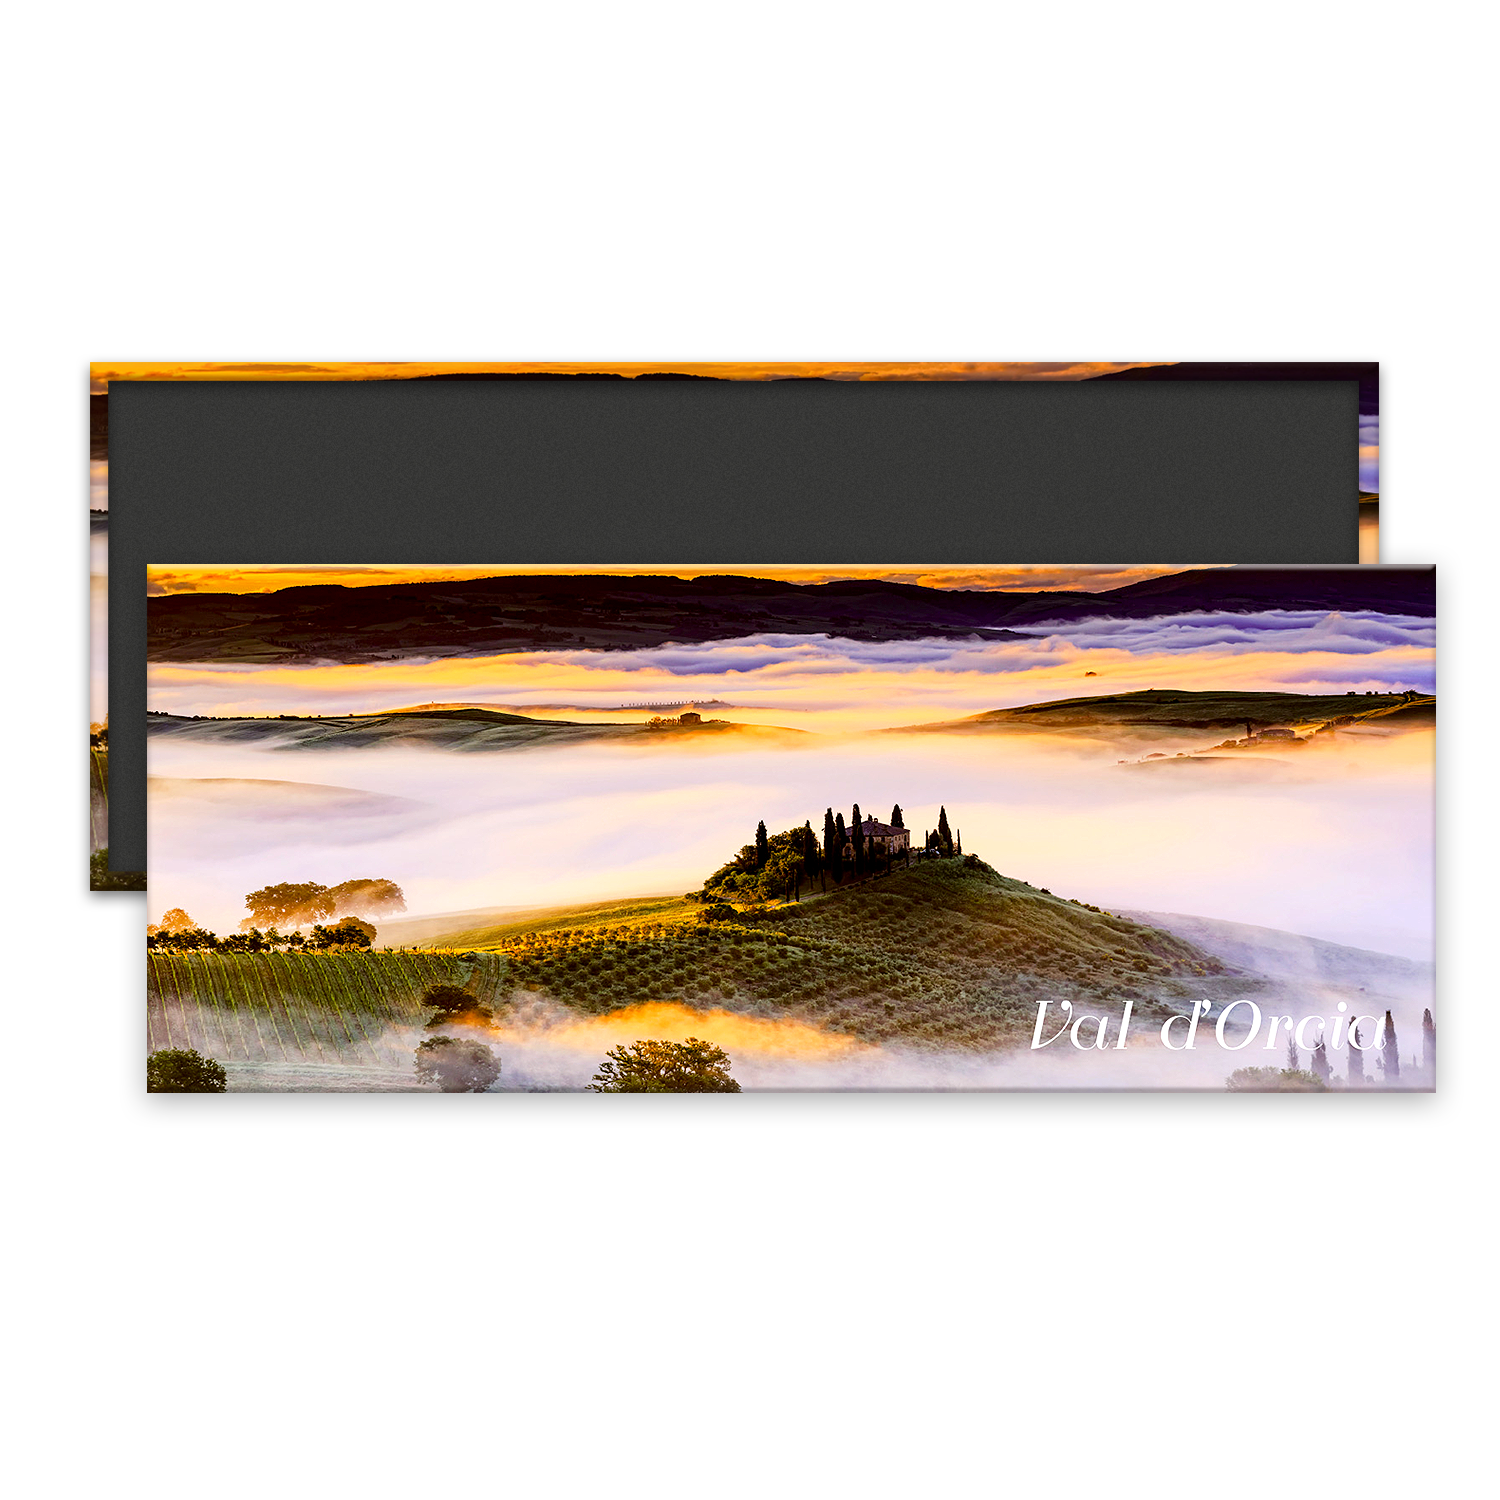 SI M 005 - Val d'Orcia